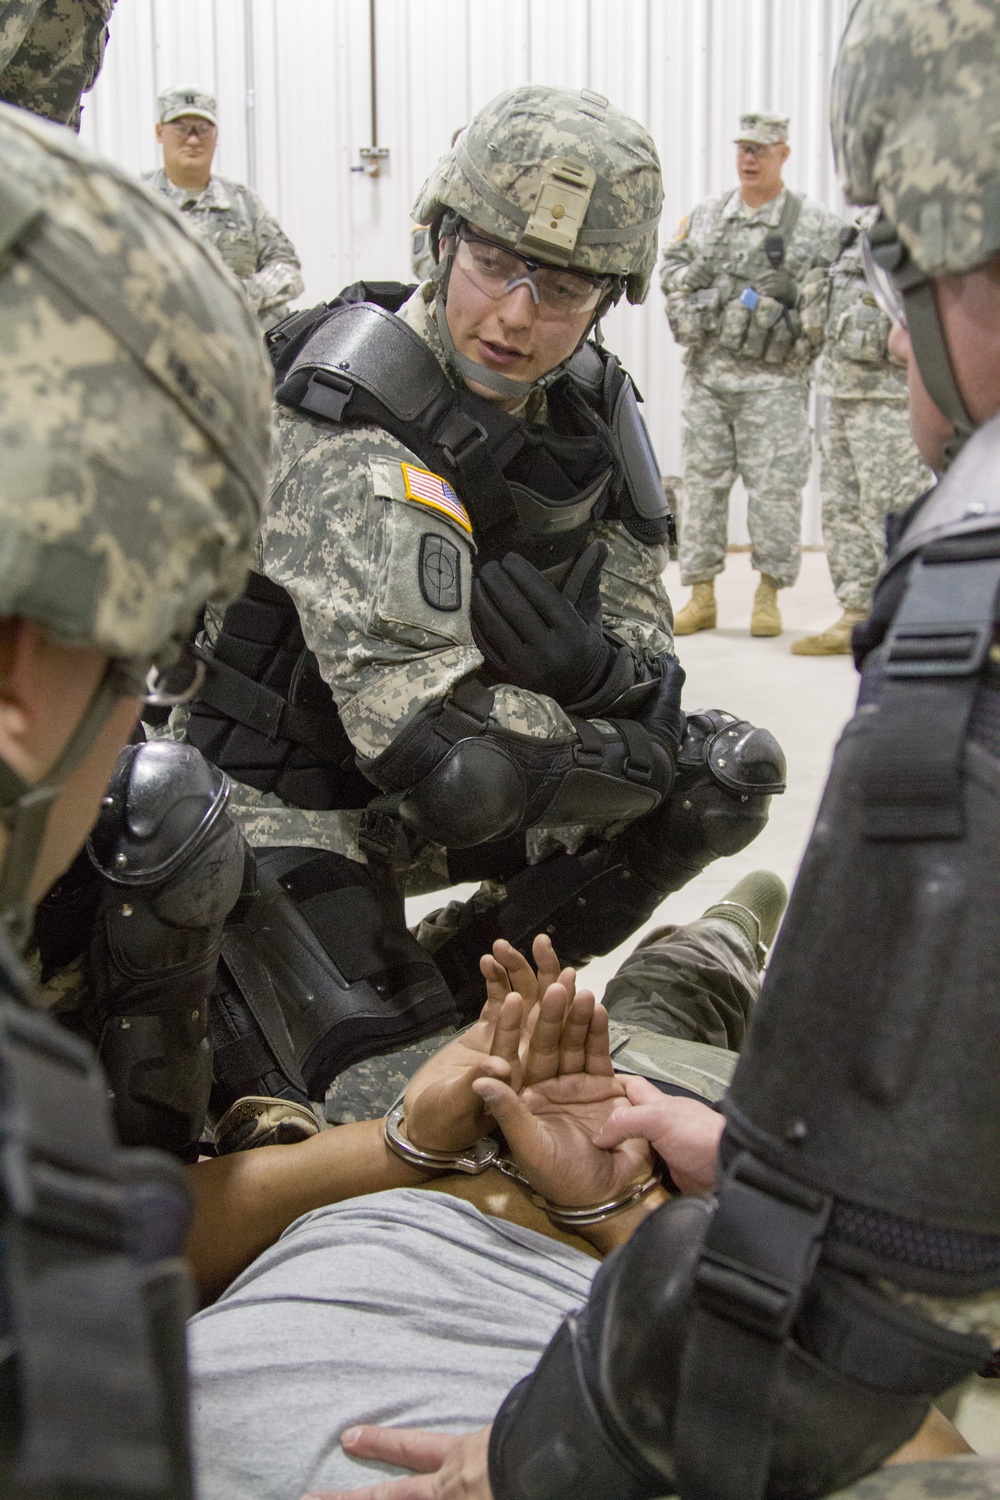 493rd MP Detainee Operations at Fort McCoy, Wis.